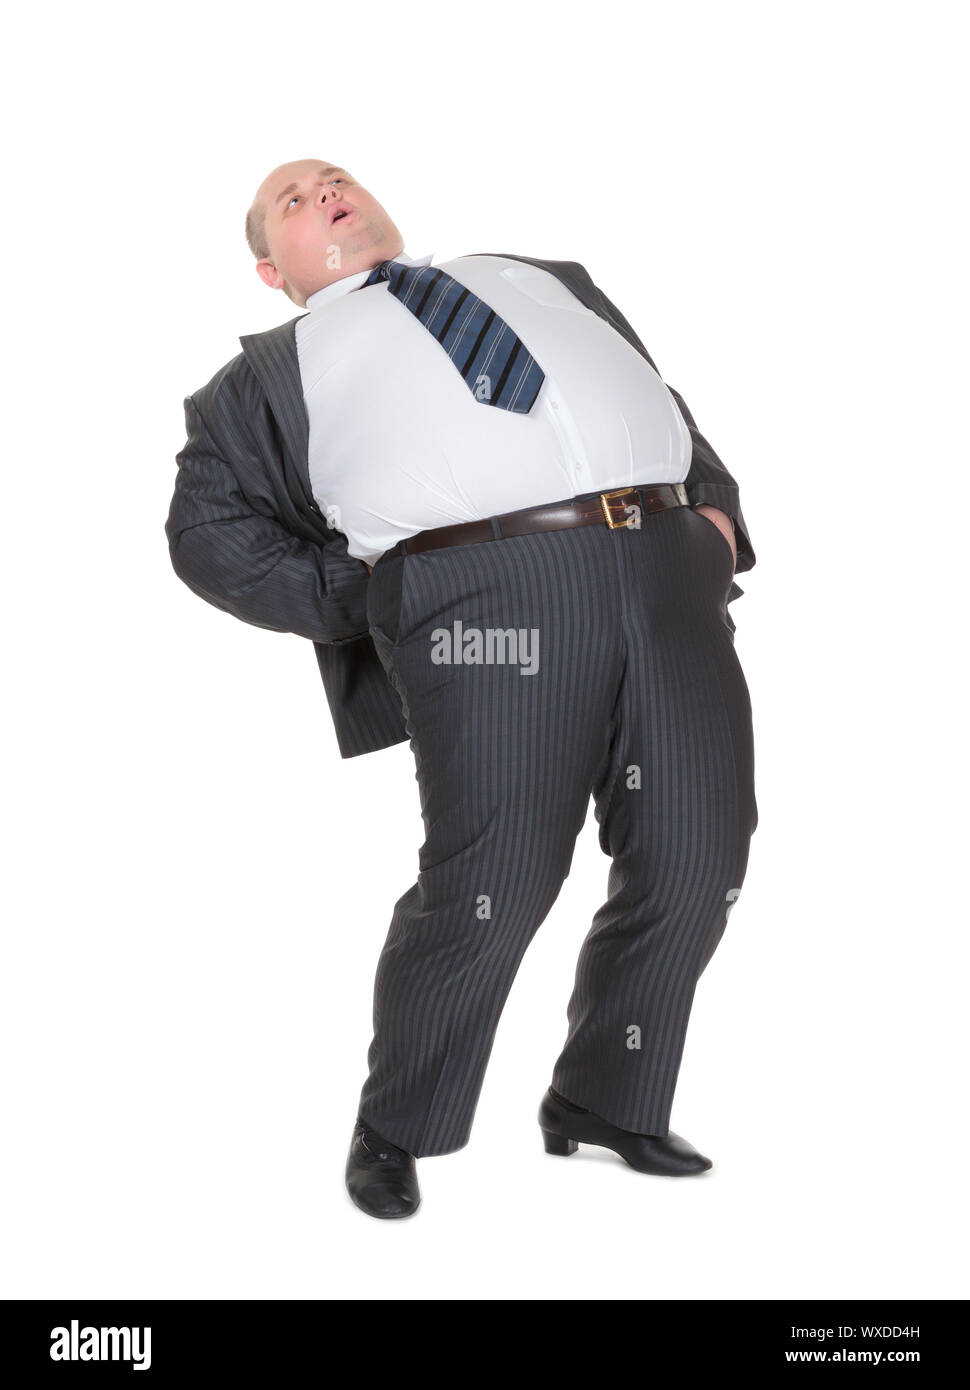 Overweight man with back pain Stock Photo